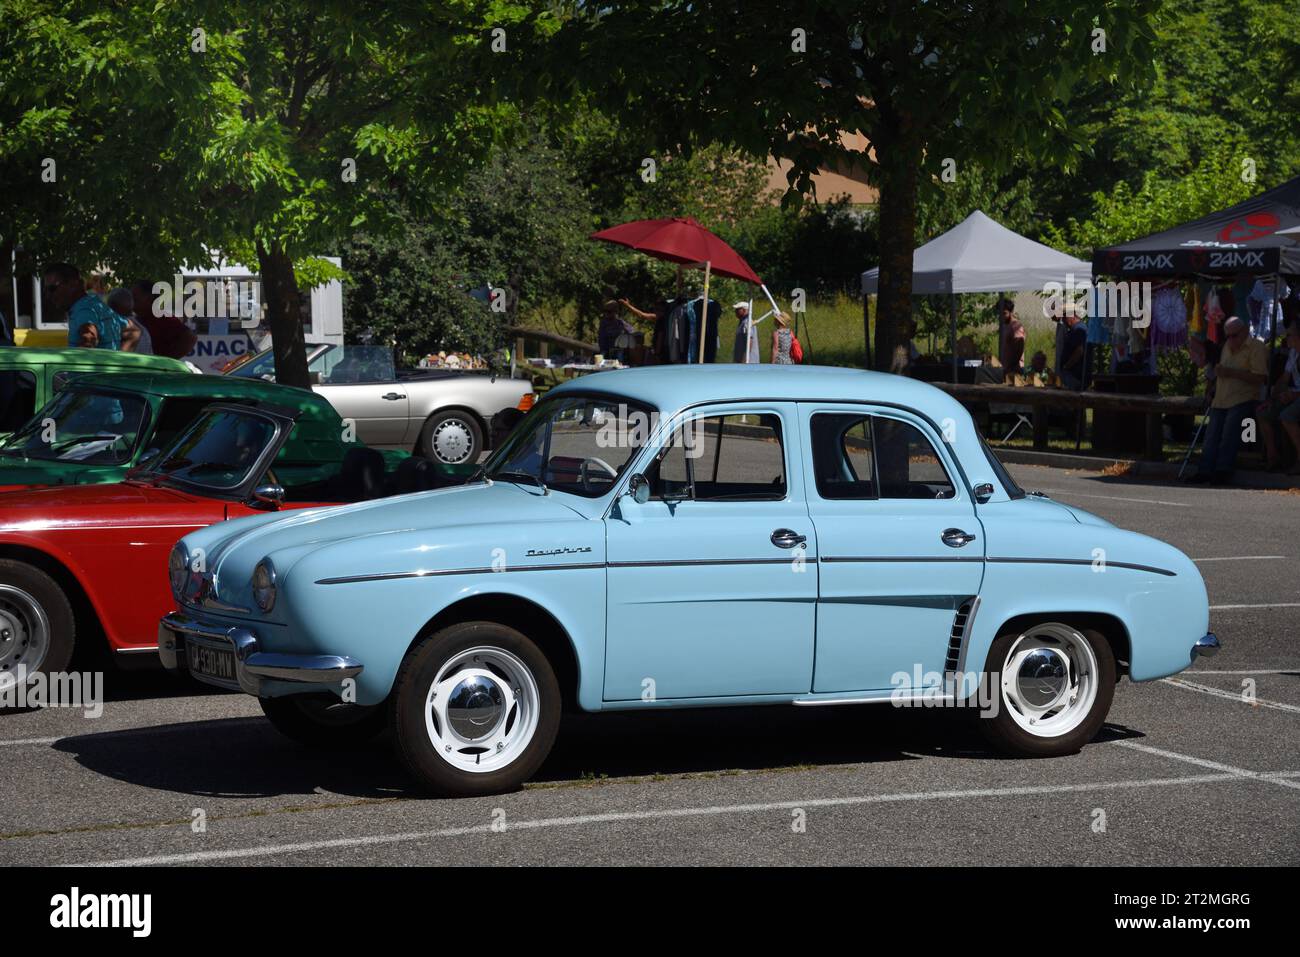 Vintage Blue Renault Dauphine Car or Automobile produced in France between 1956 and 1967. Stock Photo